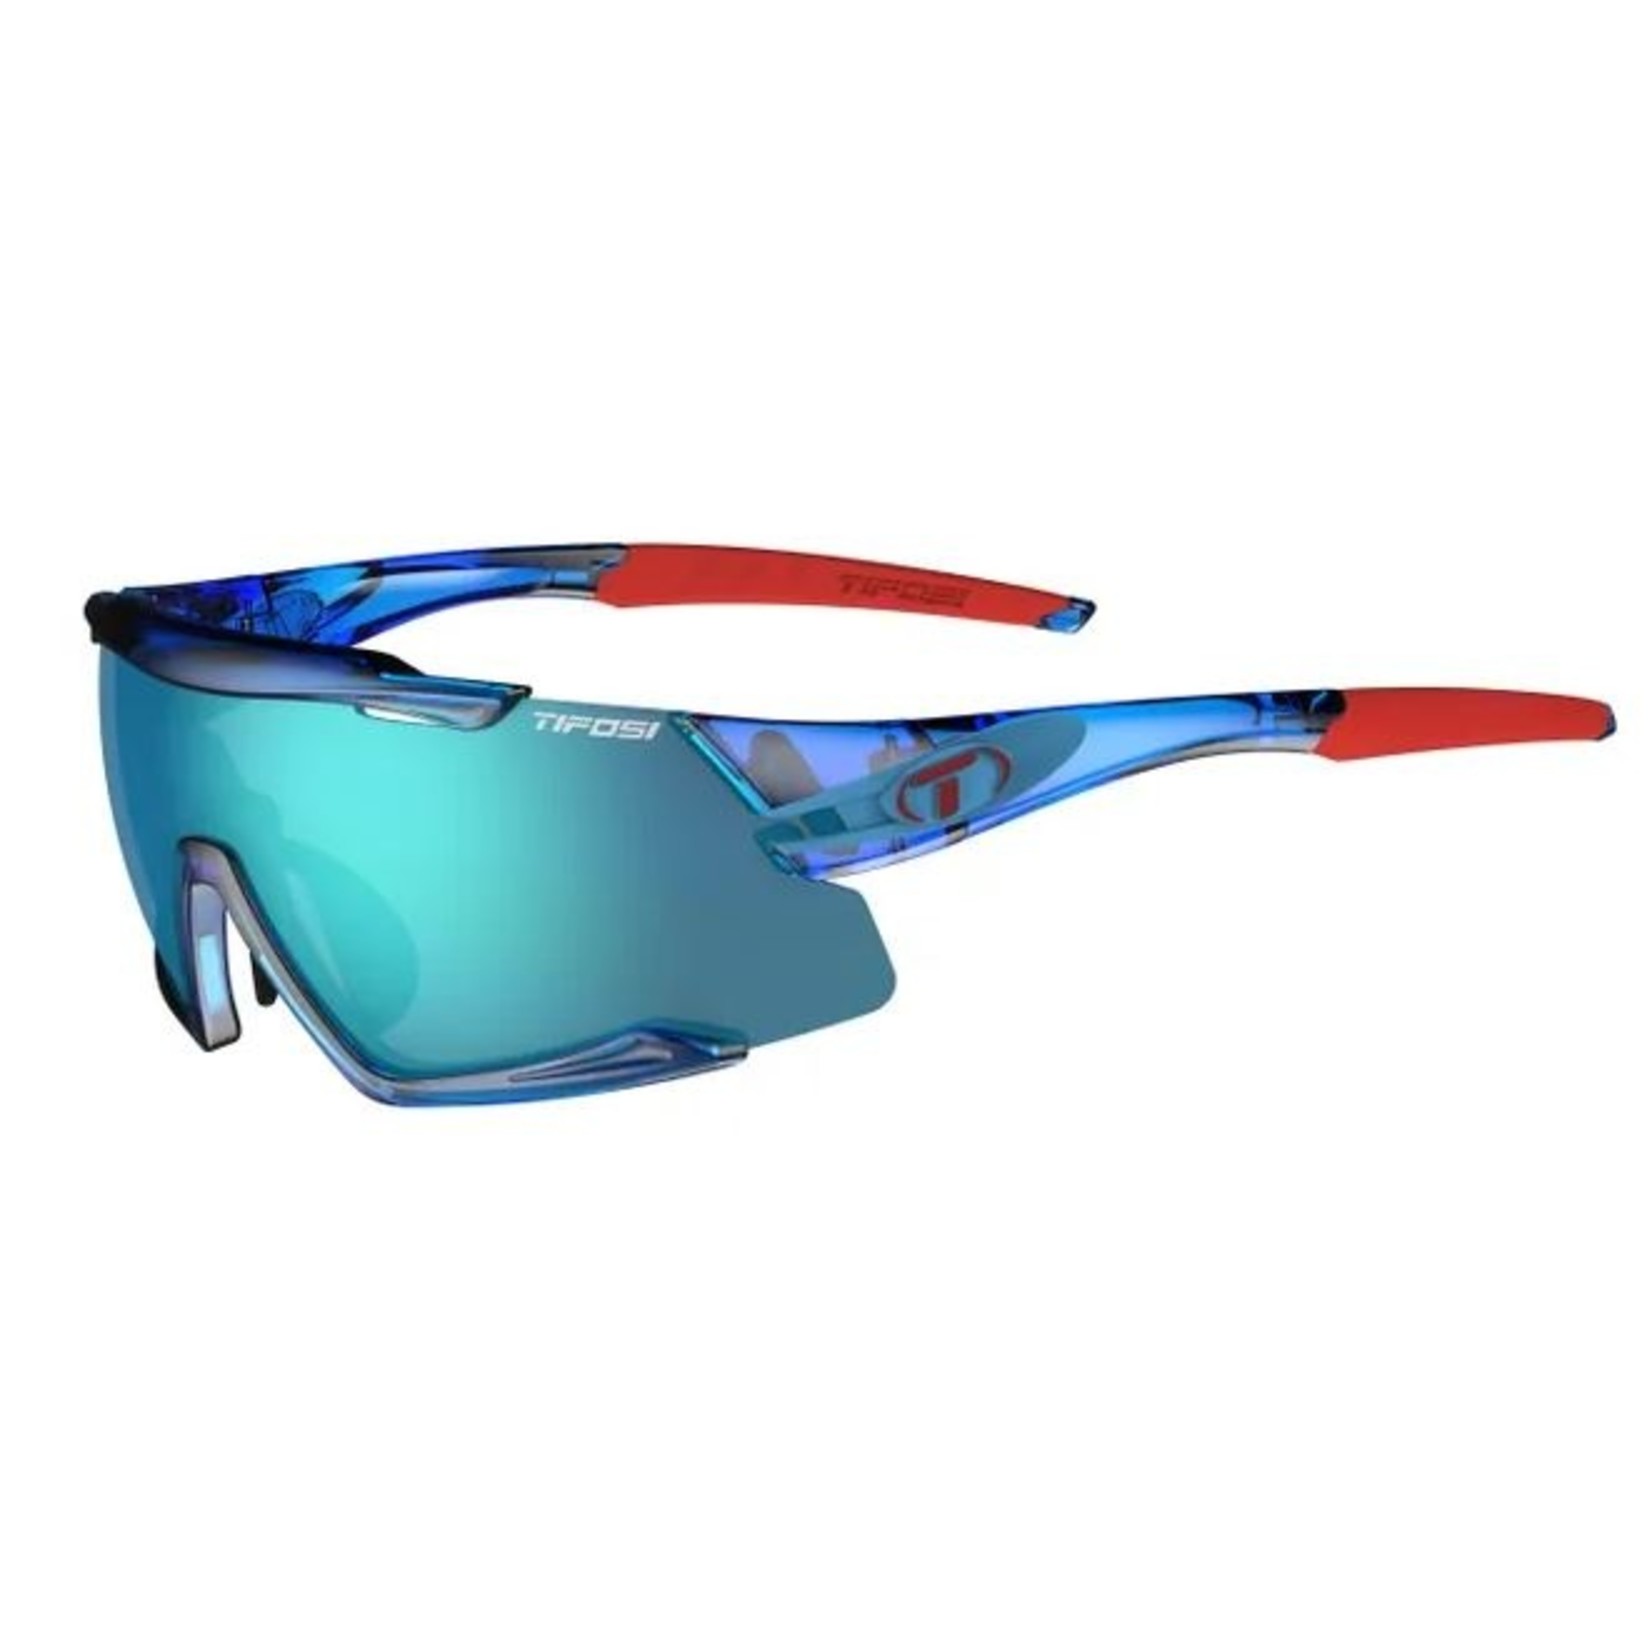 Tifosi Tifosi Cycling Sport Sunglasses - Aethon ICC Interchangeable - Crystal Blue